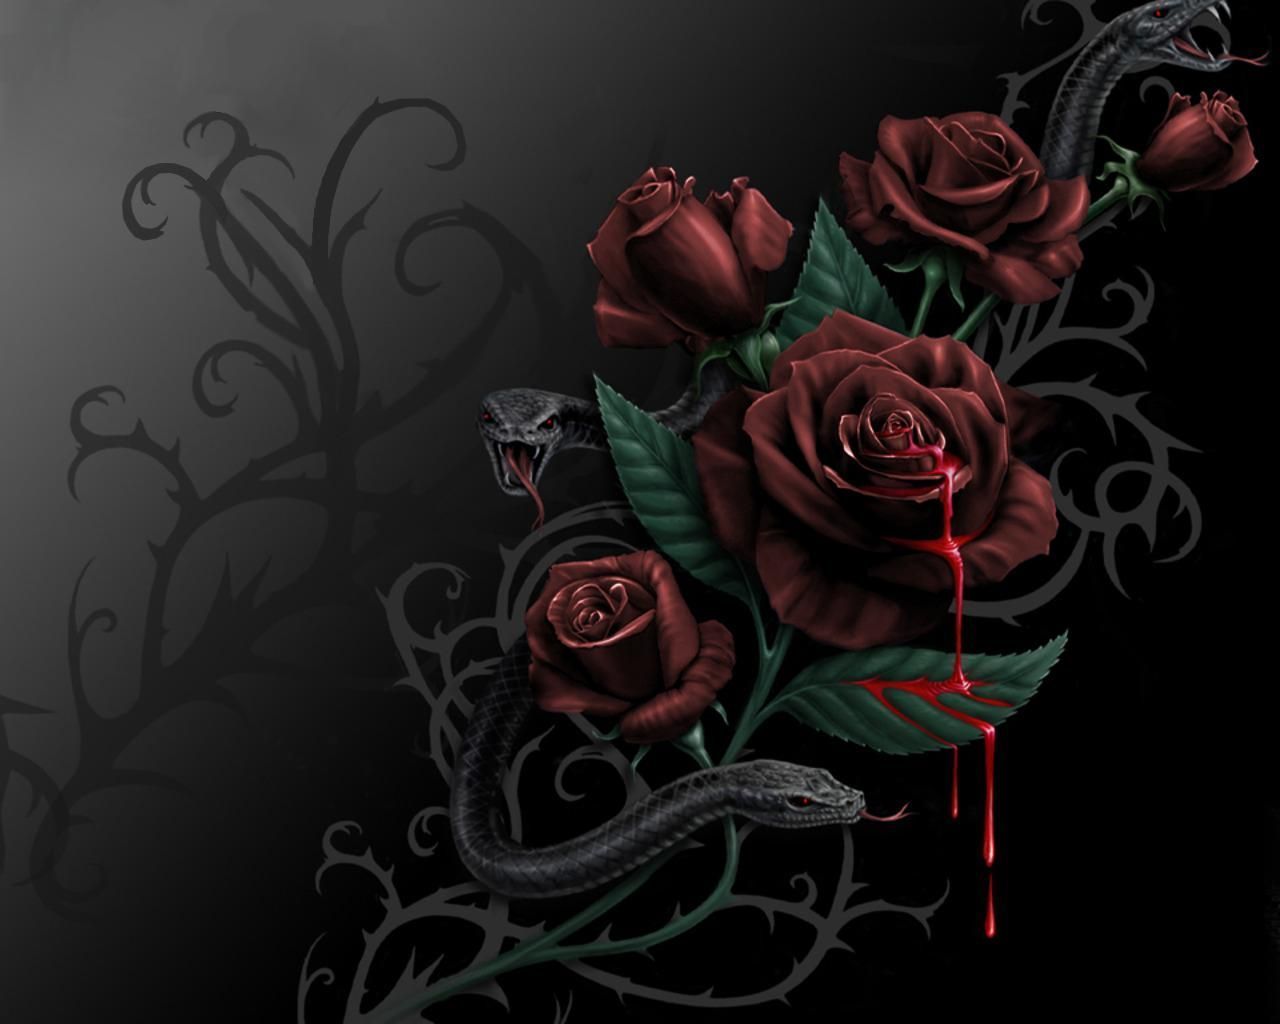 The Snake And The Rose wallpaper - Digital Art wallpapers - #35999 - Blood